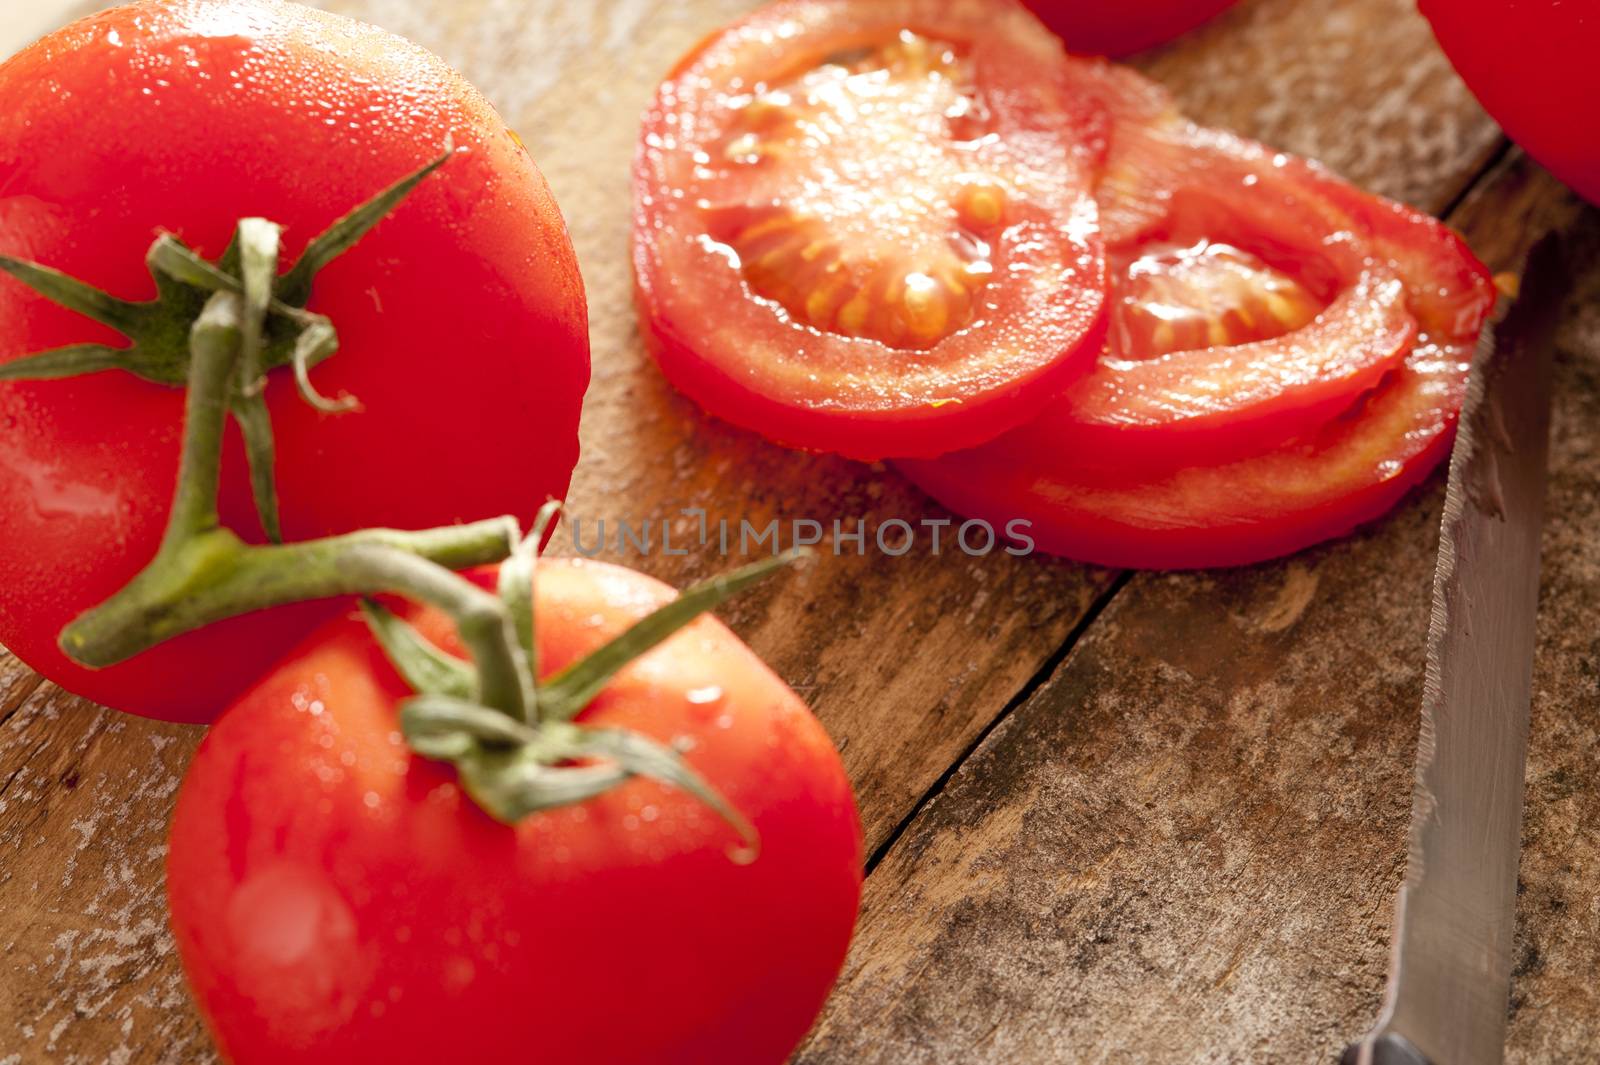 Whole and sliced tomatoes on the vine by stockarch